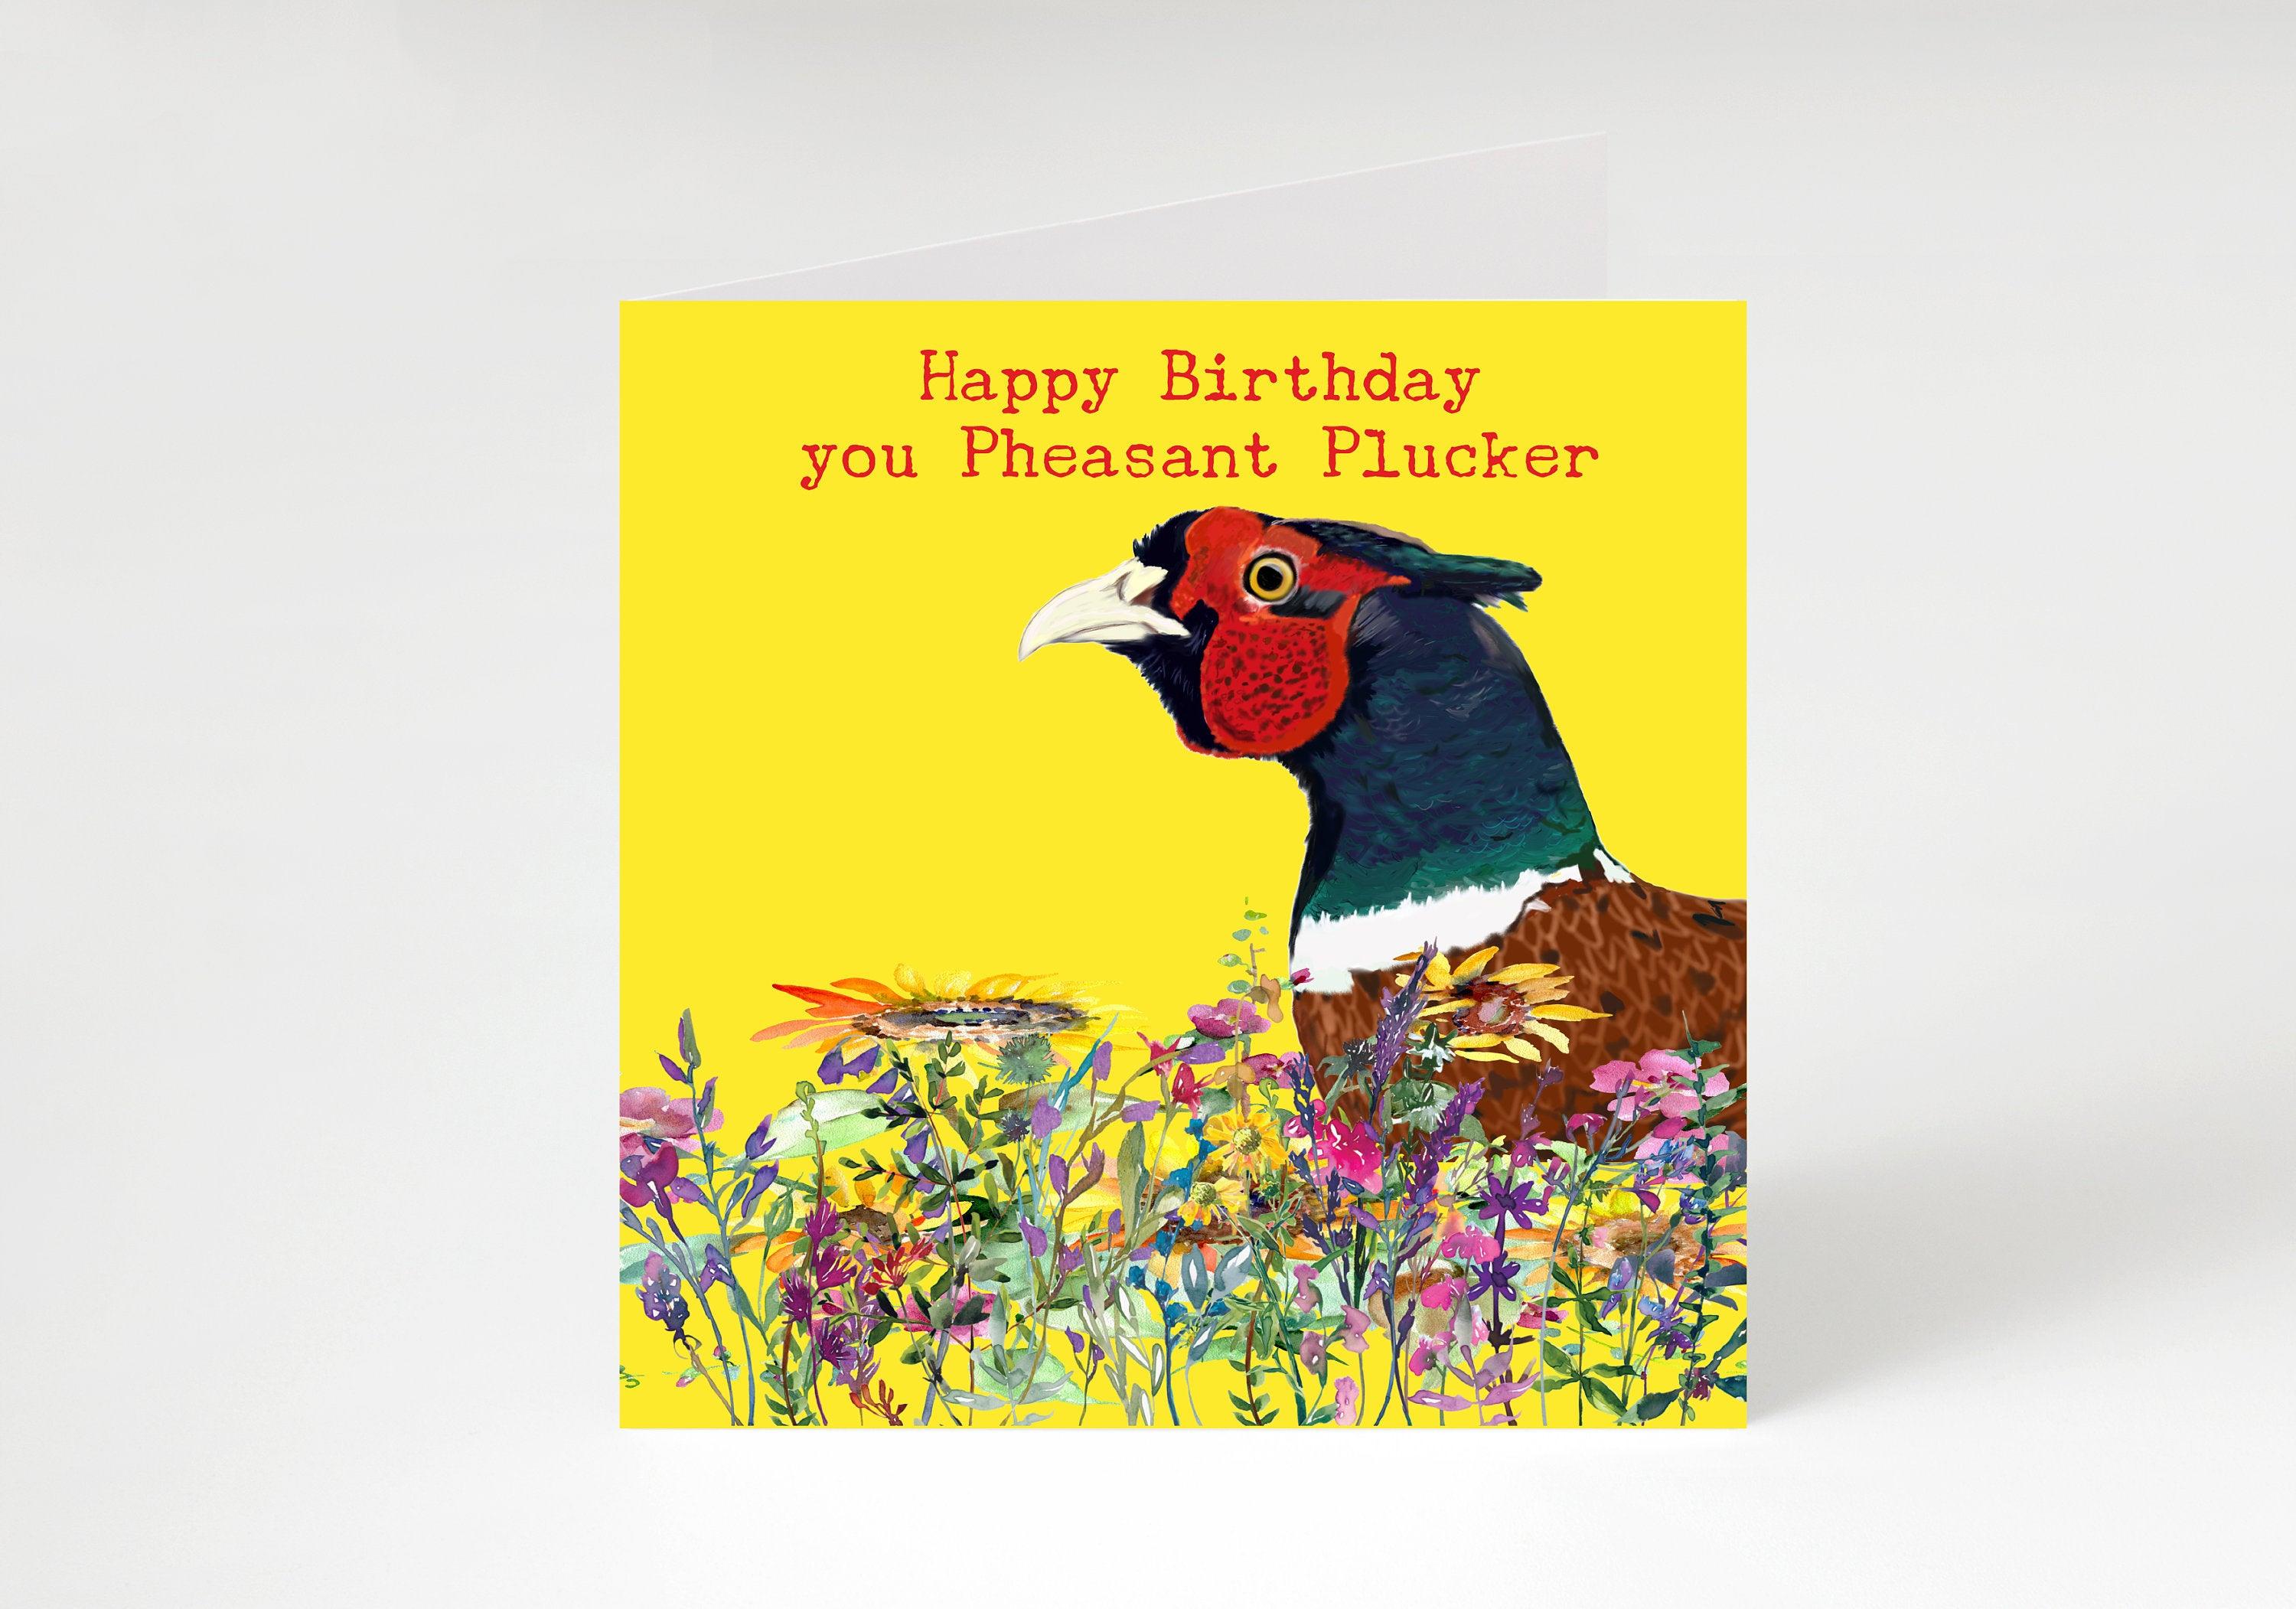 Pheasant Plucker funny birthday card, Gamekeeper cards-  funny farming cards, funny Countryside greetings cards, Farm **FREE UK DELIVERY**